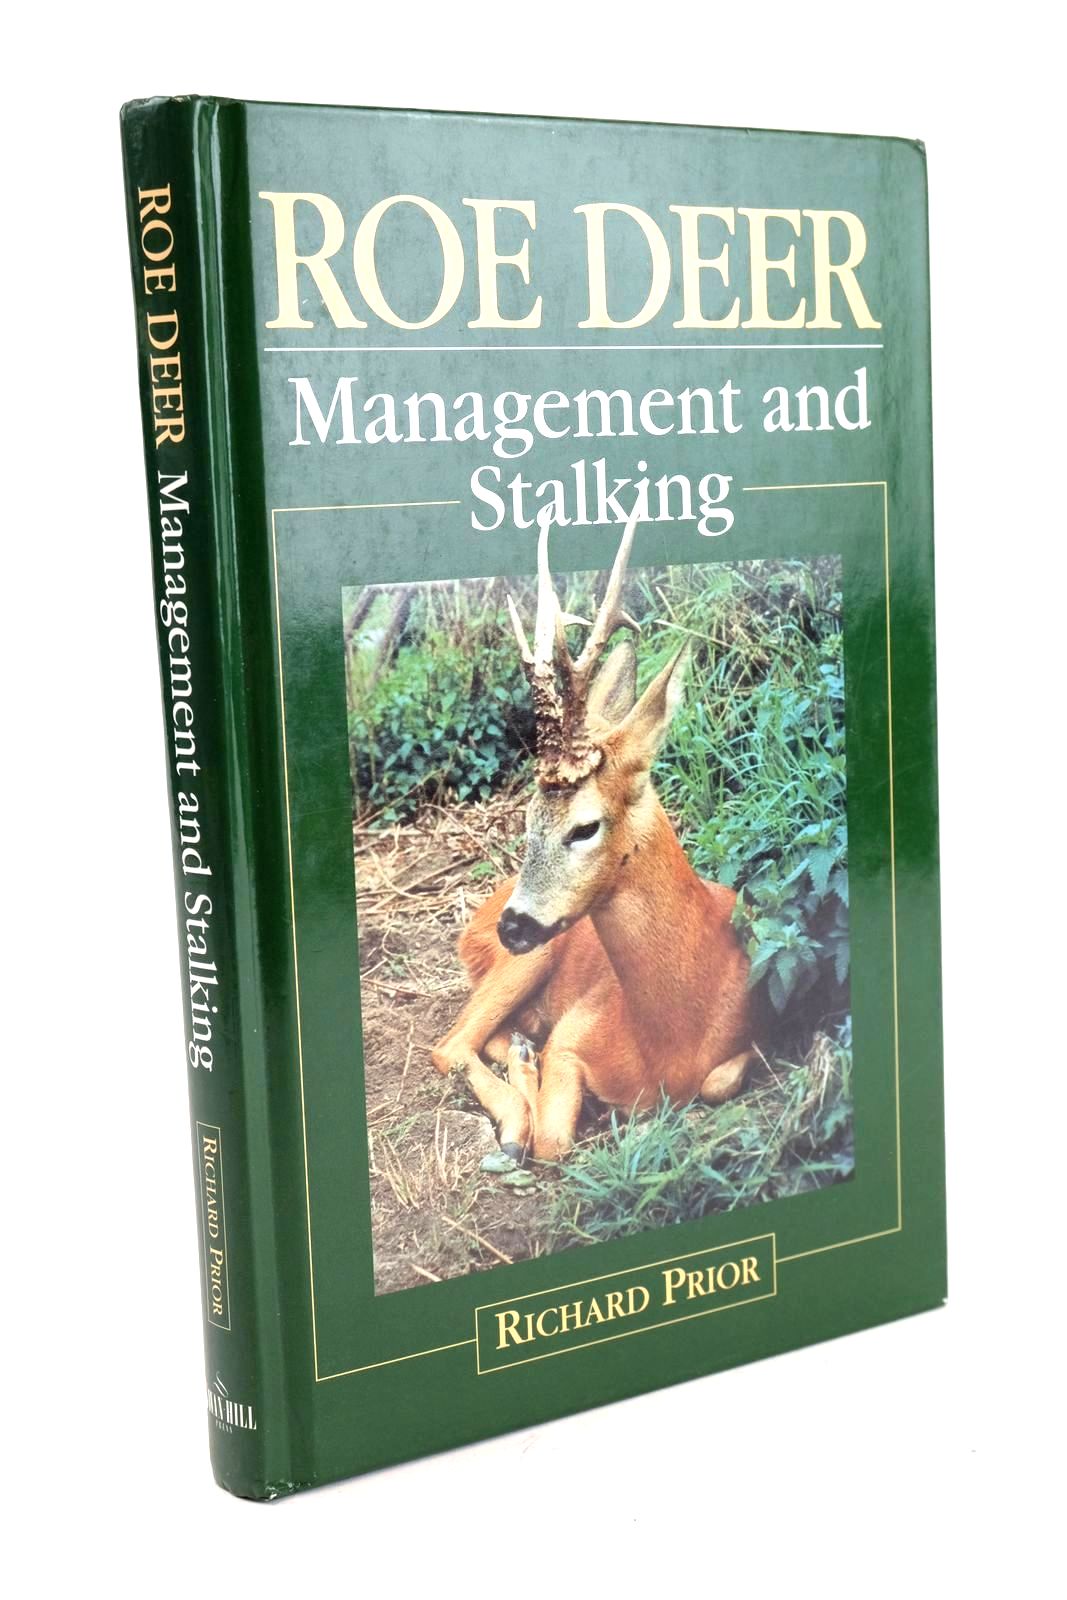 Photo of ROE DEER MANAGEMENT AND STALKING written by Prior, Richard published by Quiller (STOCK CODE: 1324383)  for sale by Stella & Rose's Books